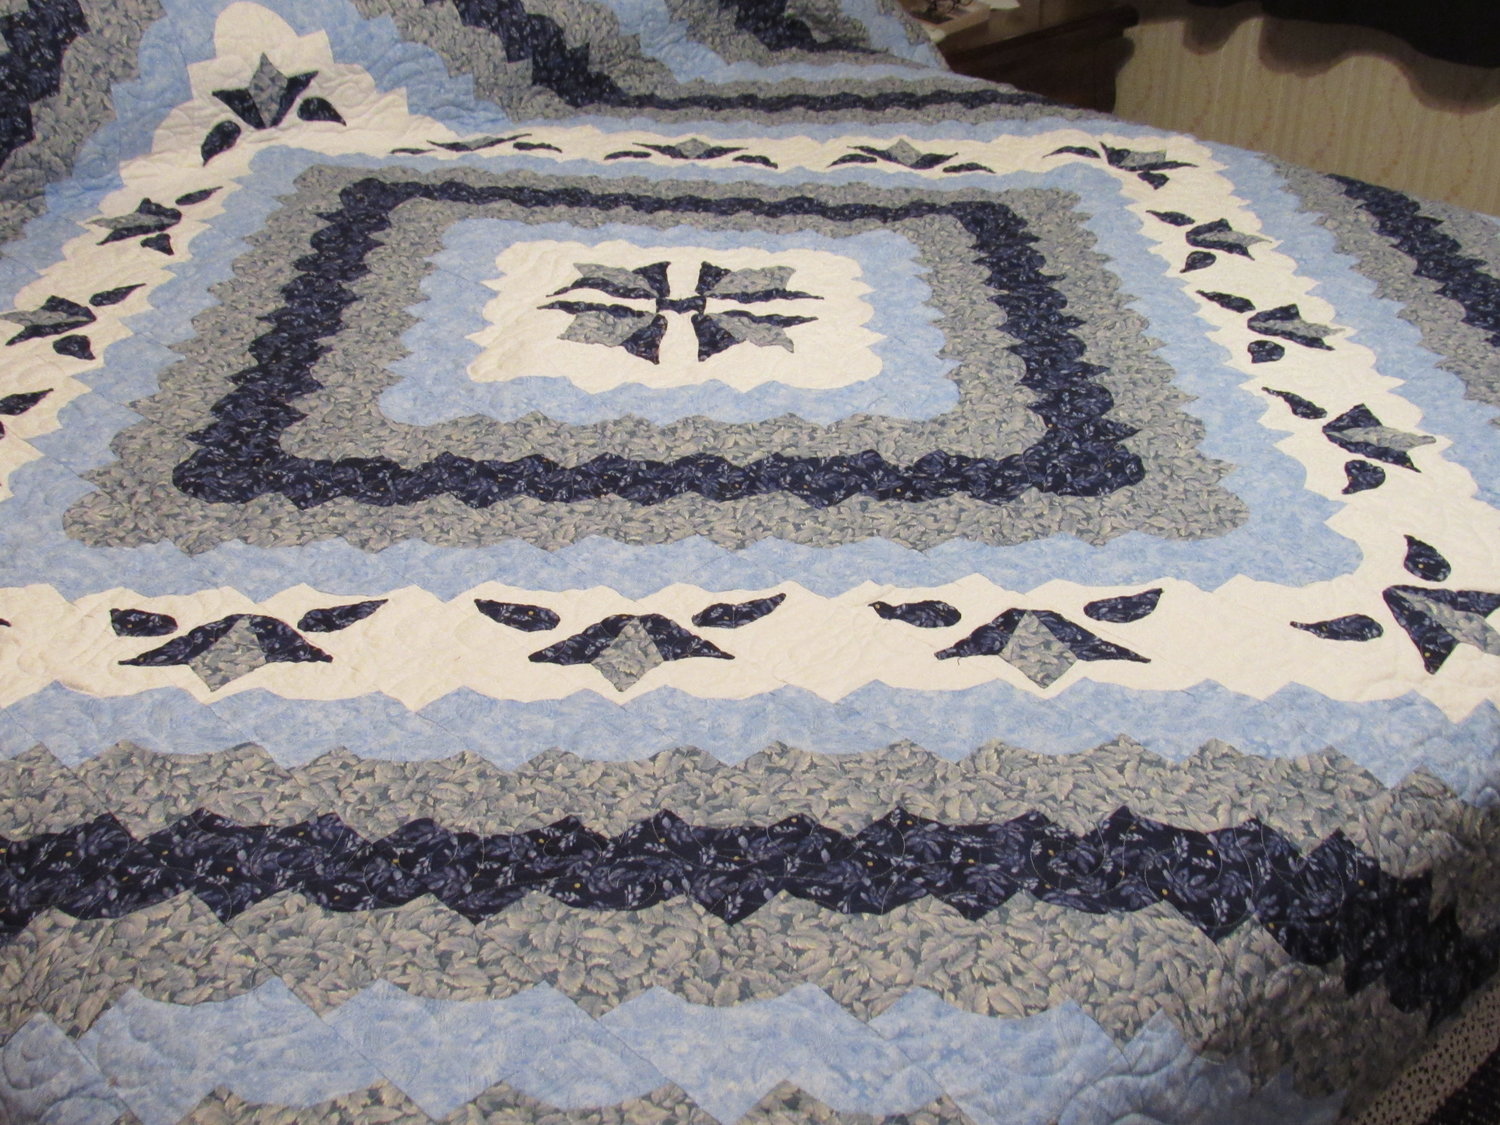 This quilt will be raffled at the horse show, and raffle ticket proceeds will benefit the Bosom Buddies.